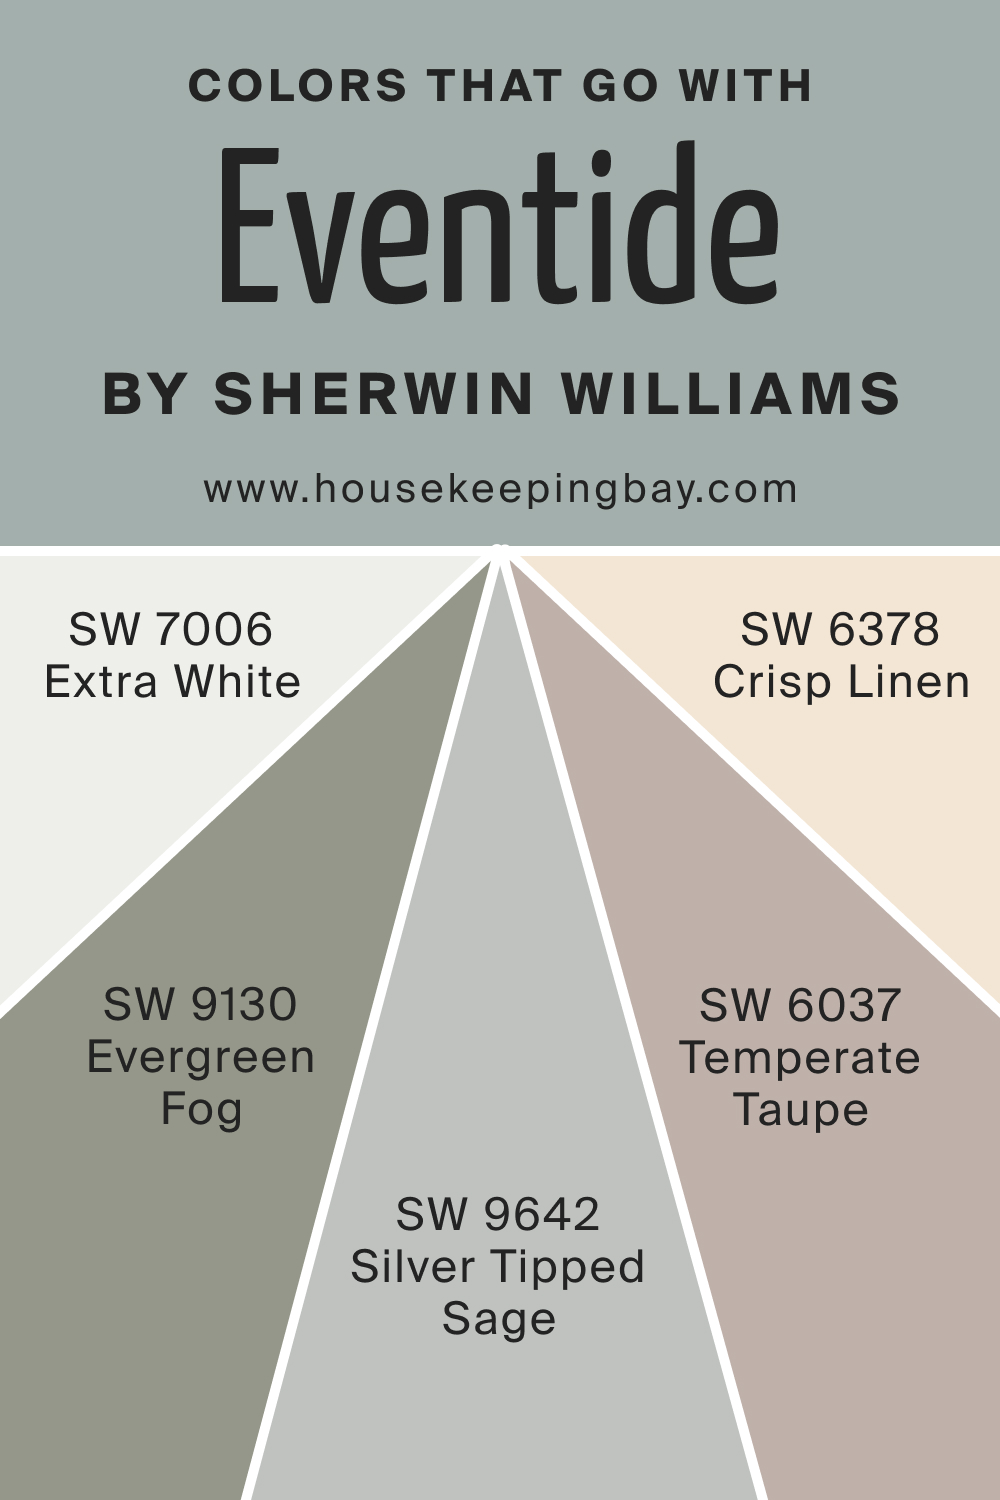 Colors that goes with SW 9643 Eventide by Sherwin Williams